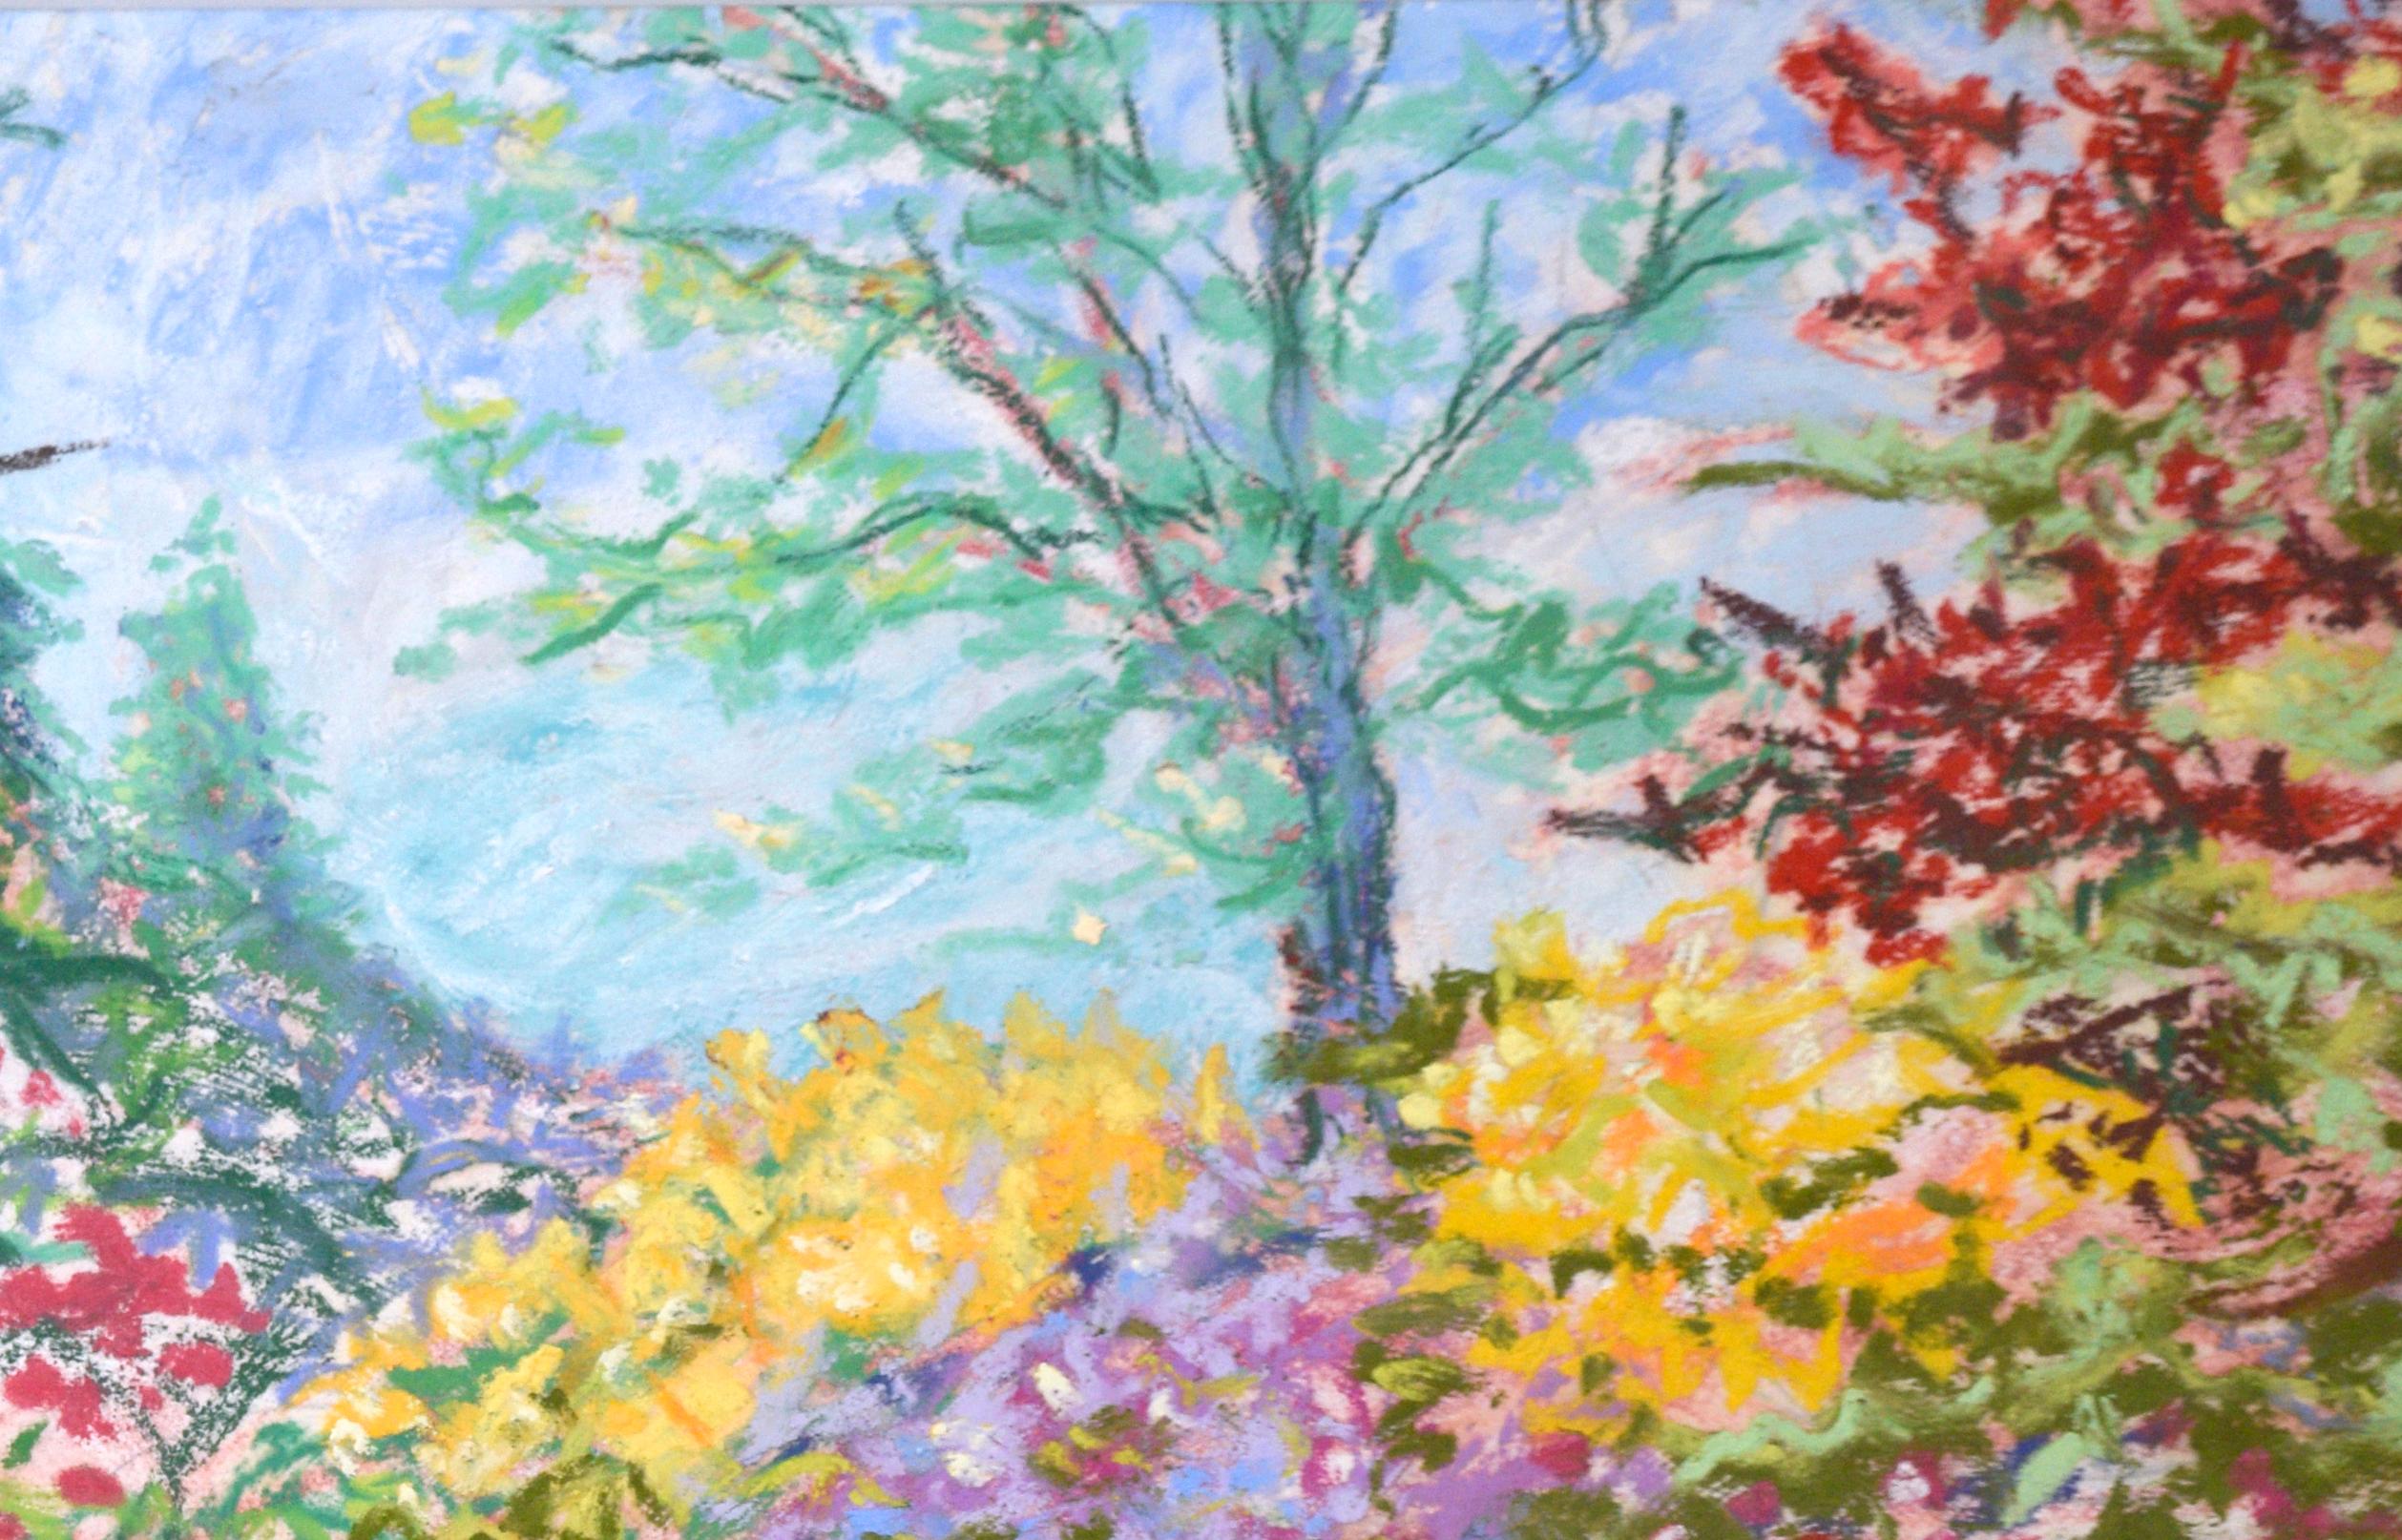 Over the Pastel Garden Wall - New England - Original Oil Pastel on Paper
Bright New England watercolor by New Hampshire artist Eileen Belanger (American, 20th C.)
A brightly colored garden in pastels fills a cornflower blue sky with a pond reflected